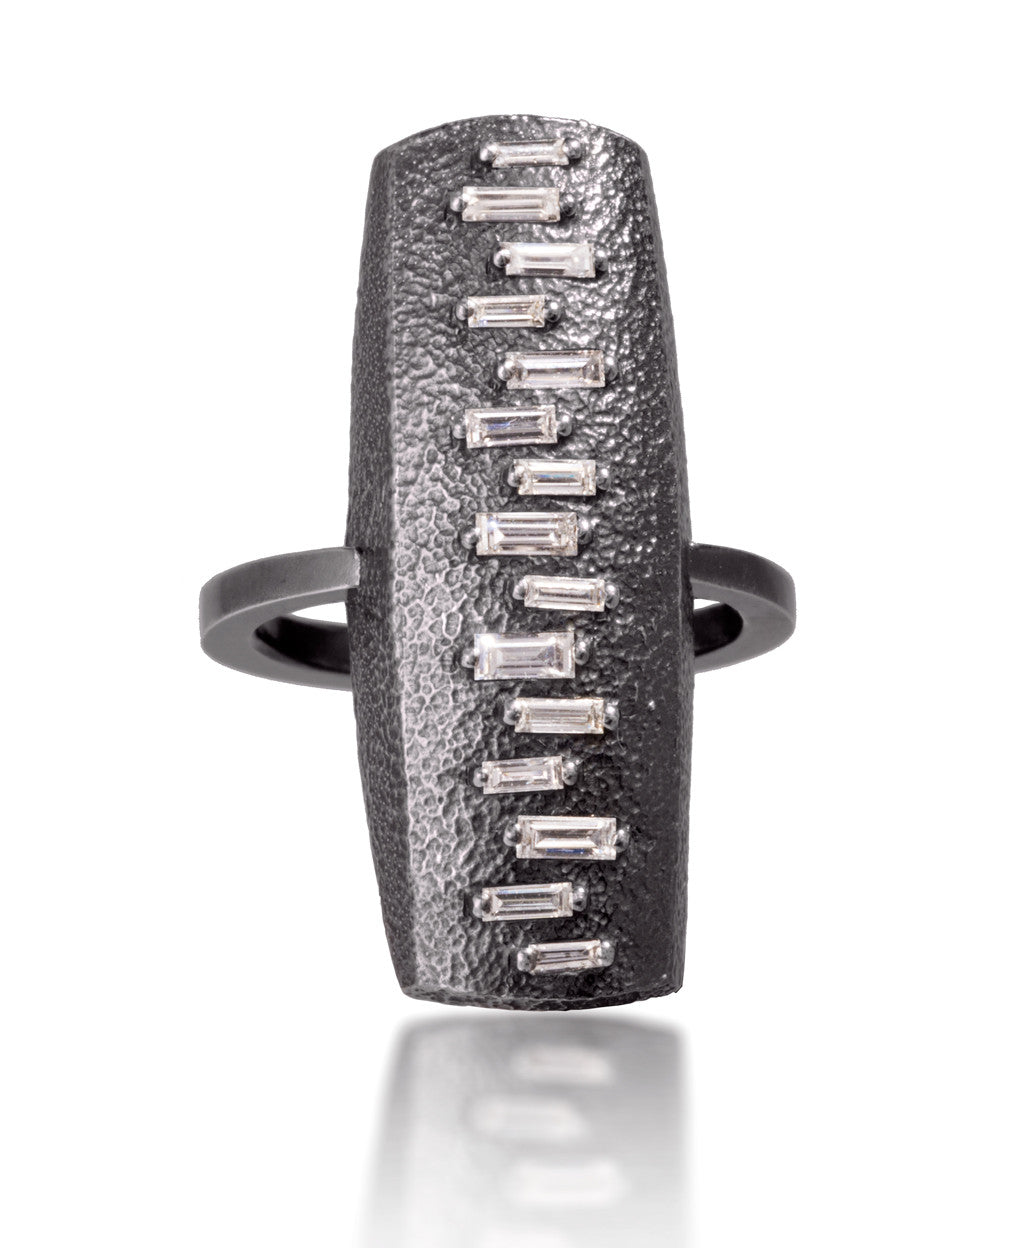 This large pendant ring is set with 15 white diamond baguettes. It is available in three richly textured color ways, oxidized silver, 18k gold, and palladium.  The graceful irregularity of the baguette angles catch the light in exciting ways when worn. 0.4713 tcw.